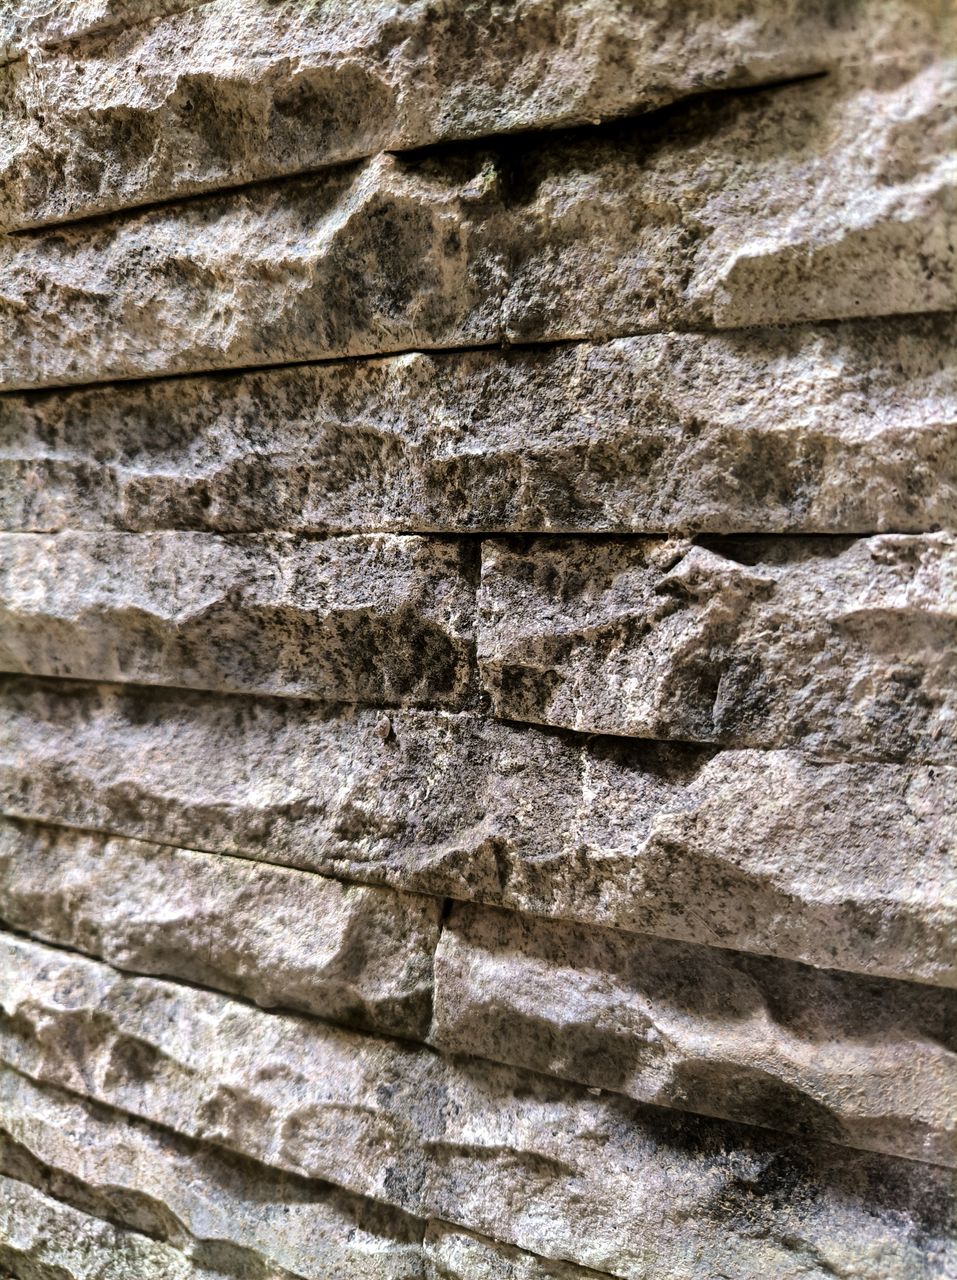 backgrounds, full frame, rock, stone wall, textured, pattern, wall, no people, wood, rough, architecture, close-up, wall - building feature, built structure, soil, trunk, nature, outdoors, day, old, stone material, abstract, stone, weathered, history